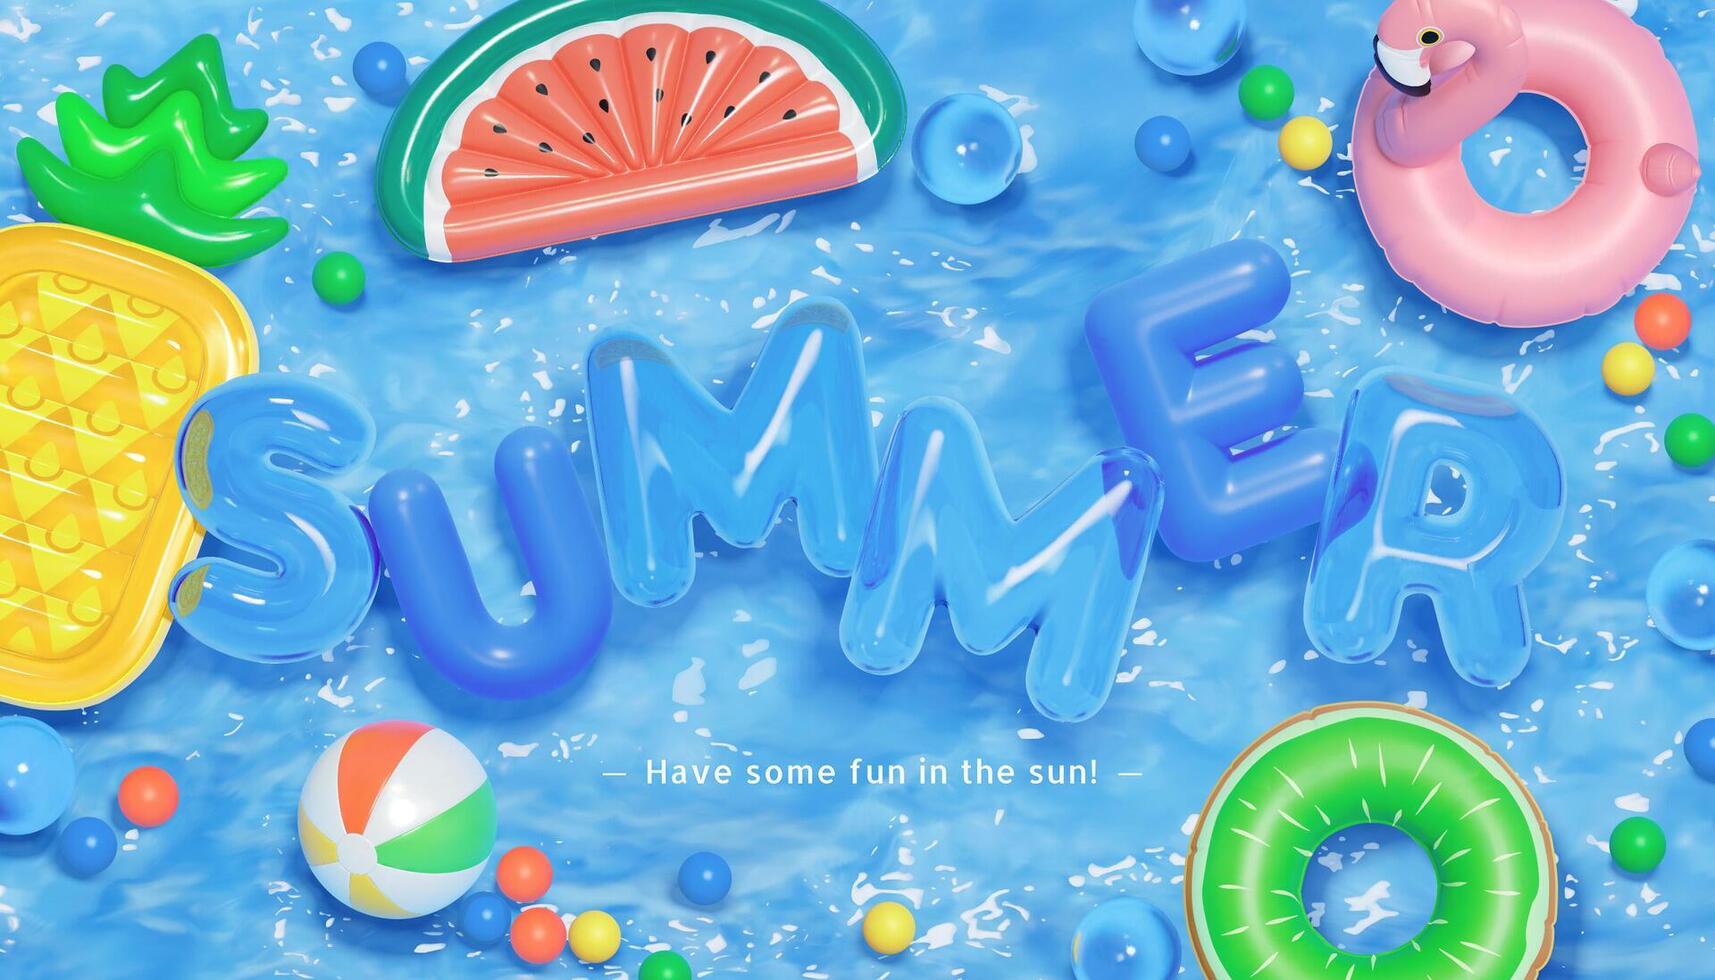 3d creative summer background in swimming pool party theme. Top view of balls, swim rings and fruit shape lilos floating on water. vector